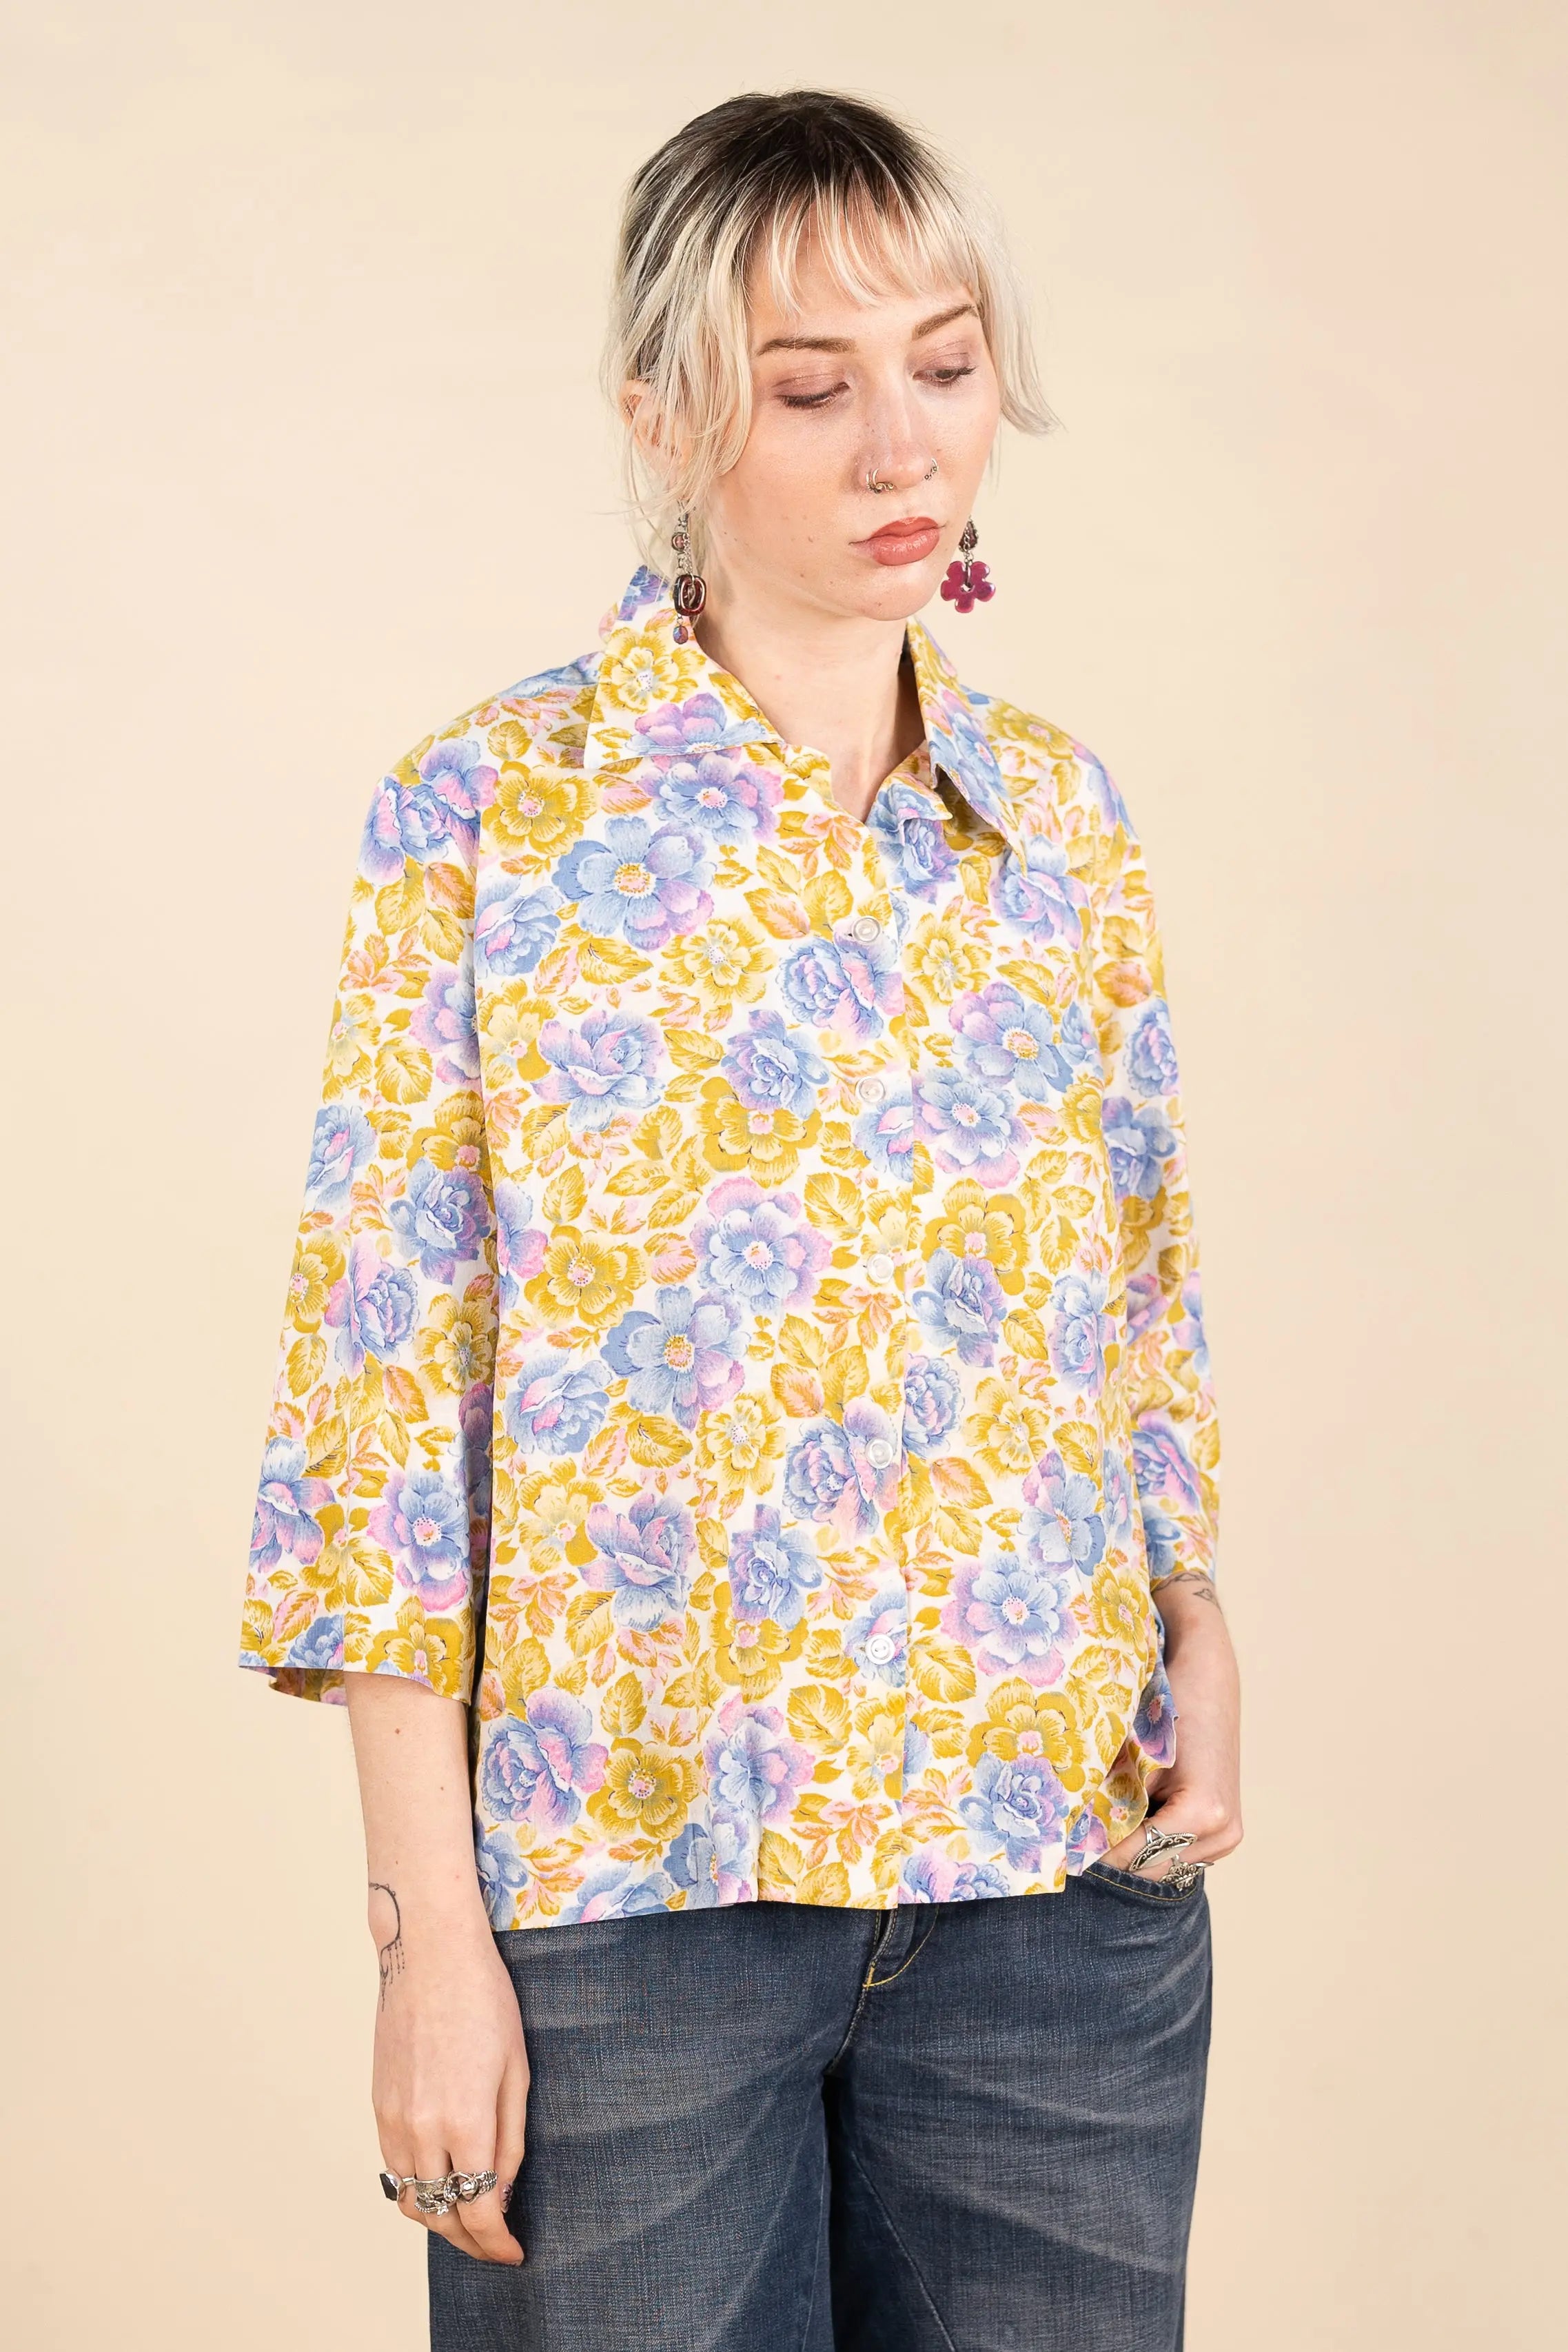 Handmade - Handmade Floral Shirt- ThriftTale.com - Vintage and second handclothing